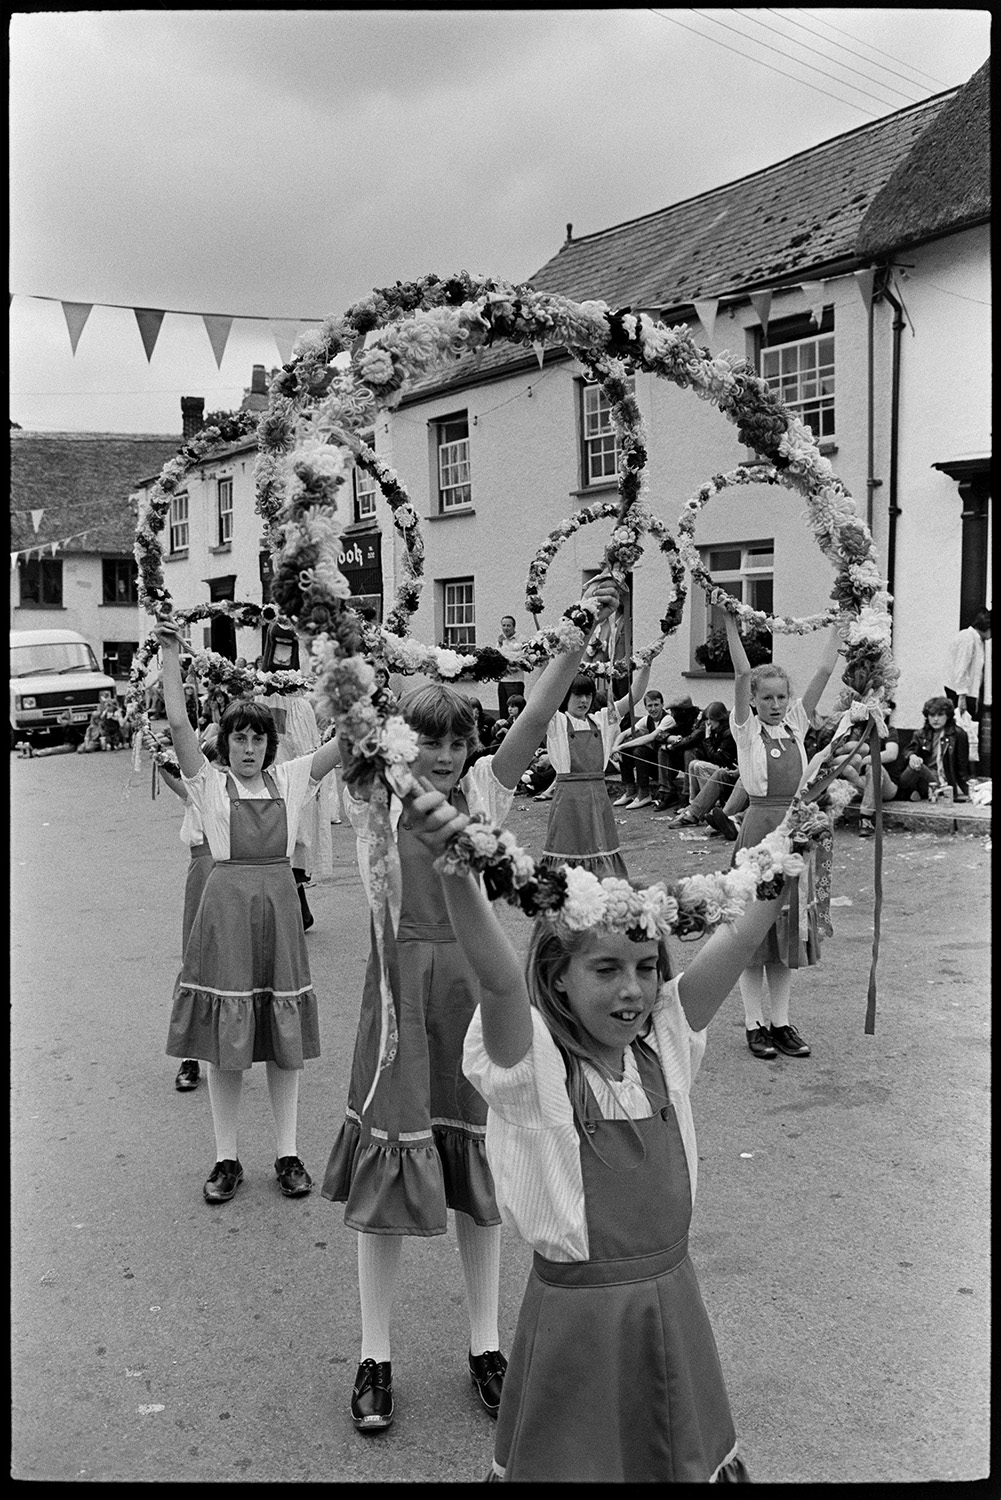 Village Fair, folk clog dancing. Fancy dress, spectators. 
[A group of girl Morris Dancers or Clog Dancers performing with floral garlands at Winkleigh Fair. People are watching them in Winkleigh Square and the street is decorated with bunting.]